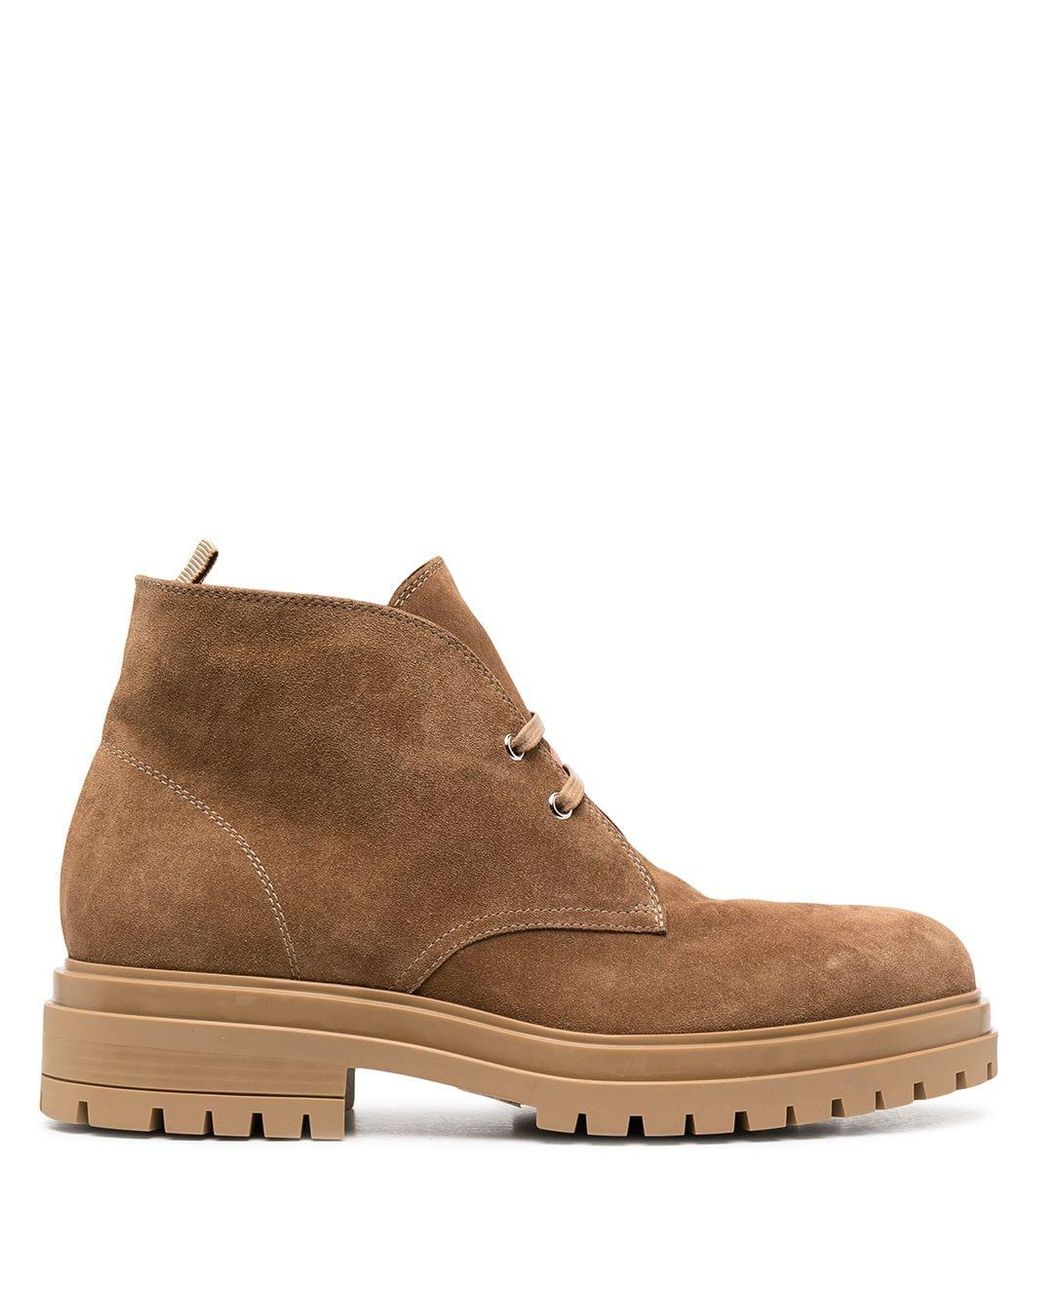 Gianvito Rossi Lace-up Suede Desert Boots in Brown for Men - Lyst